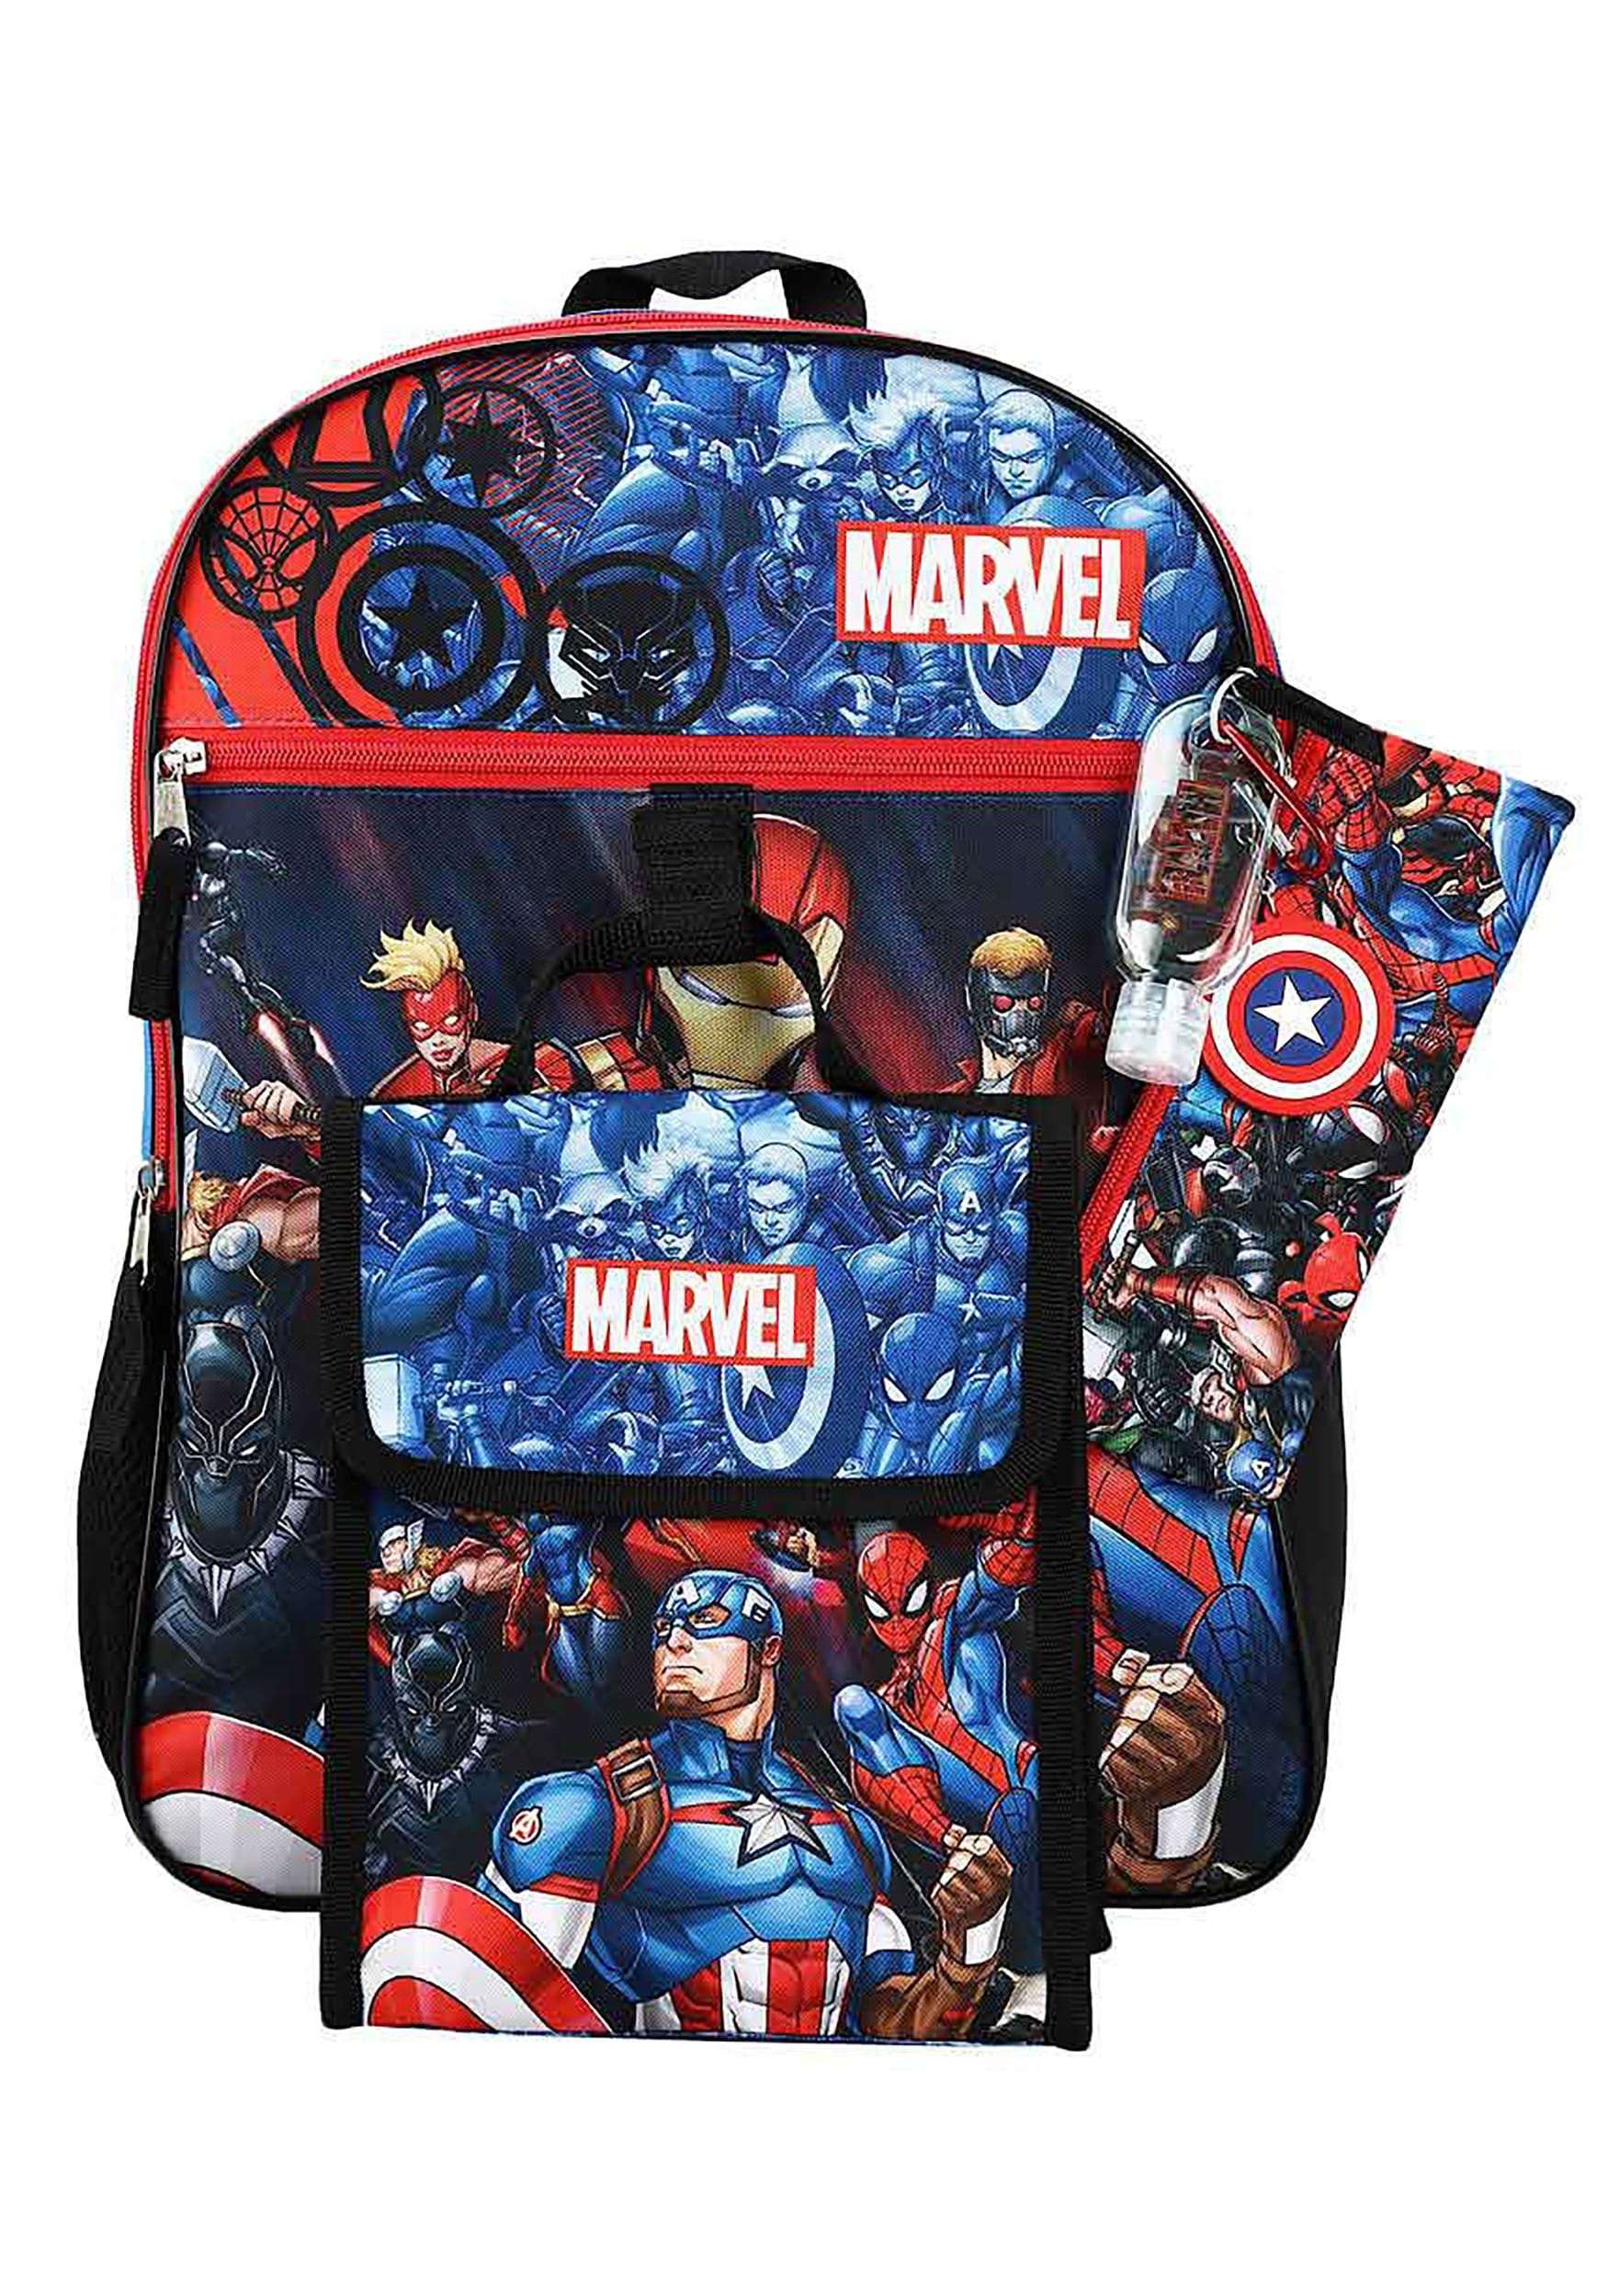 https://images.fun.com/products/86231/1-1/marvel-universe-6-piece-backpack-set.jpg